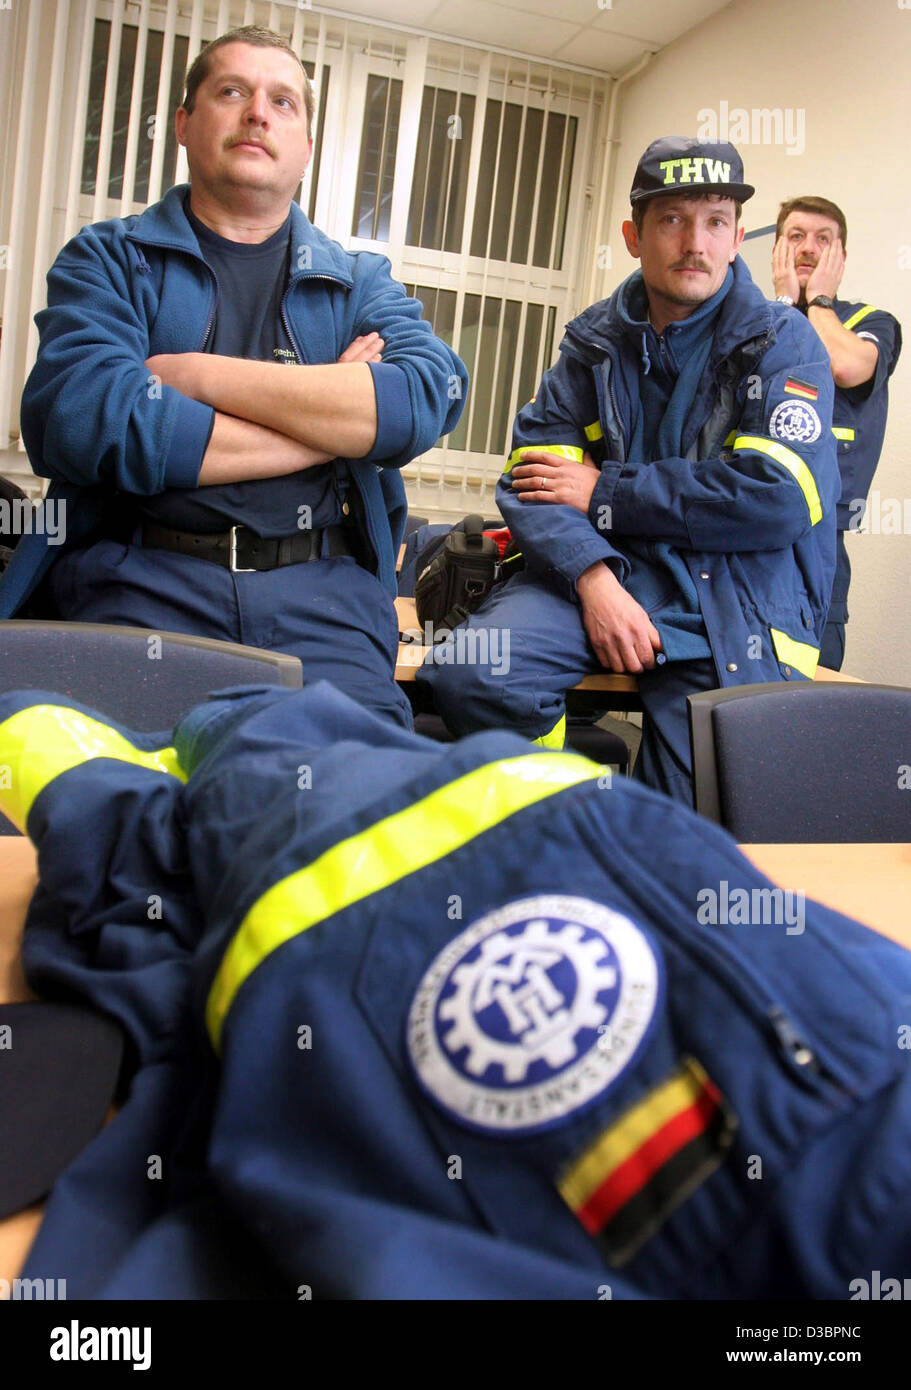 (dpa) - Employees of the German THW, a governmental technical relief organization, await their departure to Sri Lanka at the airport in Frankfurt, Germany, Tuesday 28 December 2004. 14 THW employees prepared for the mission in Sri Lanka. The relief workers from the German states of Bavaria and Baden Stock Photo